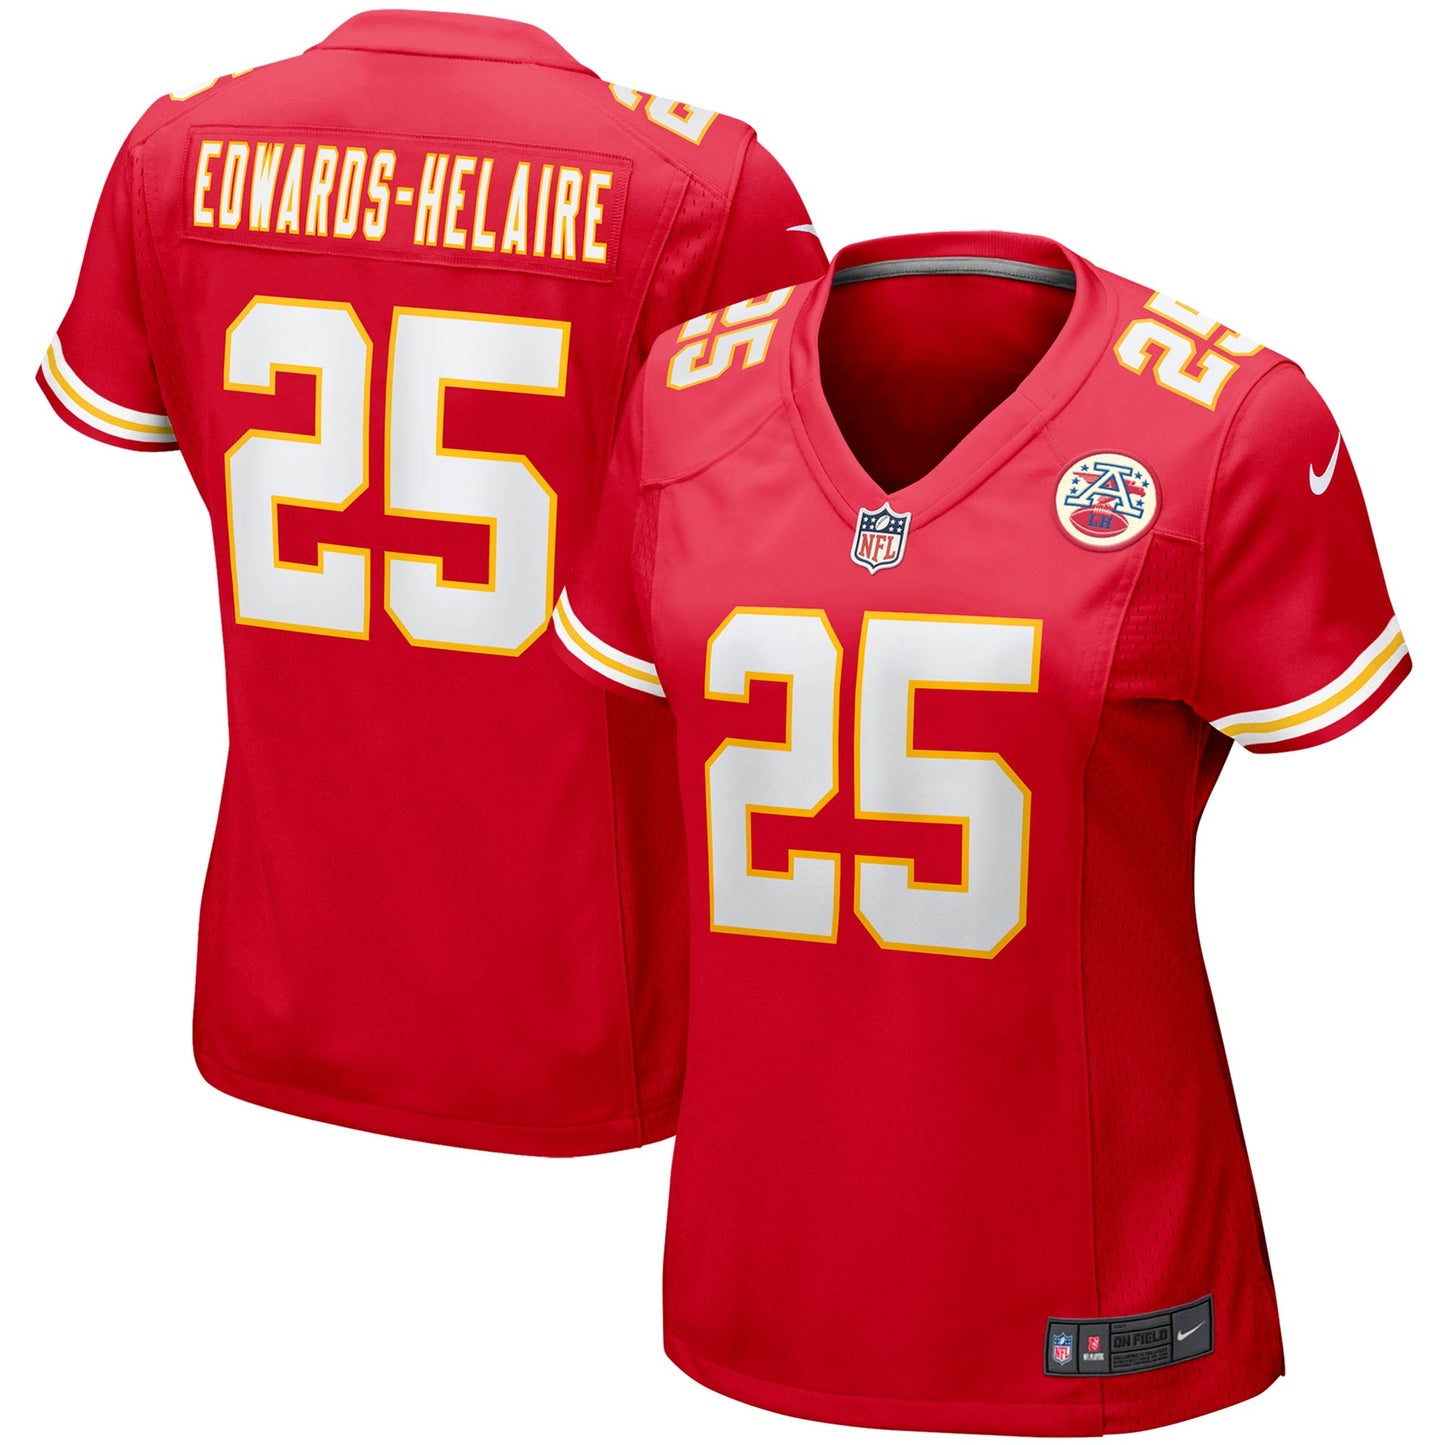 Clyde Edwards-Helaire Kansas City Chiefs Nike Women's Player Jersey - Red